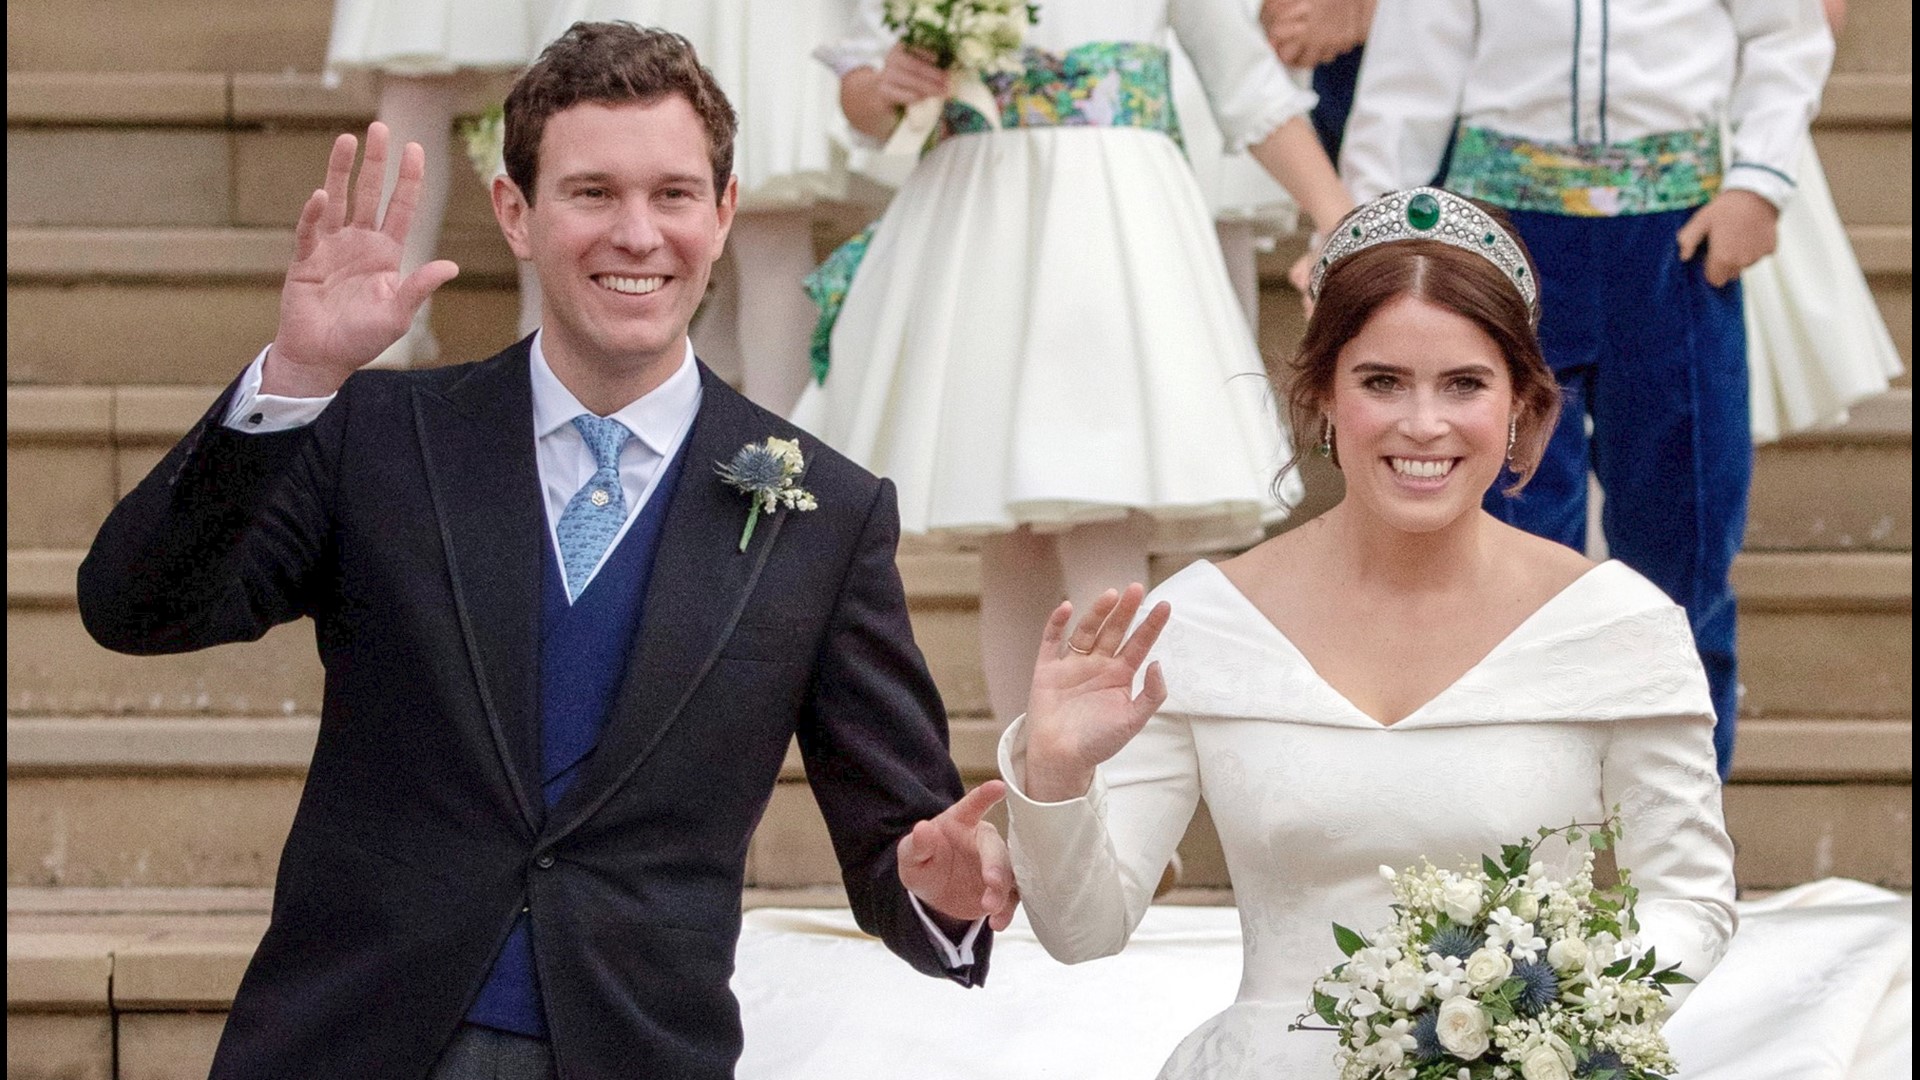 The UK's Princess Eugenie and her husband Jack Brooksbank have announced they are expecting a new bundle of joy. So what are the chances this little one will ever sit on the British throne? Buzz60's TC Newman has more.